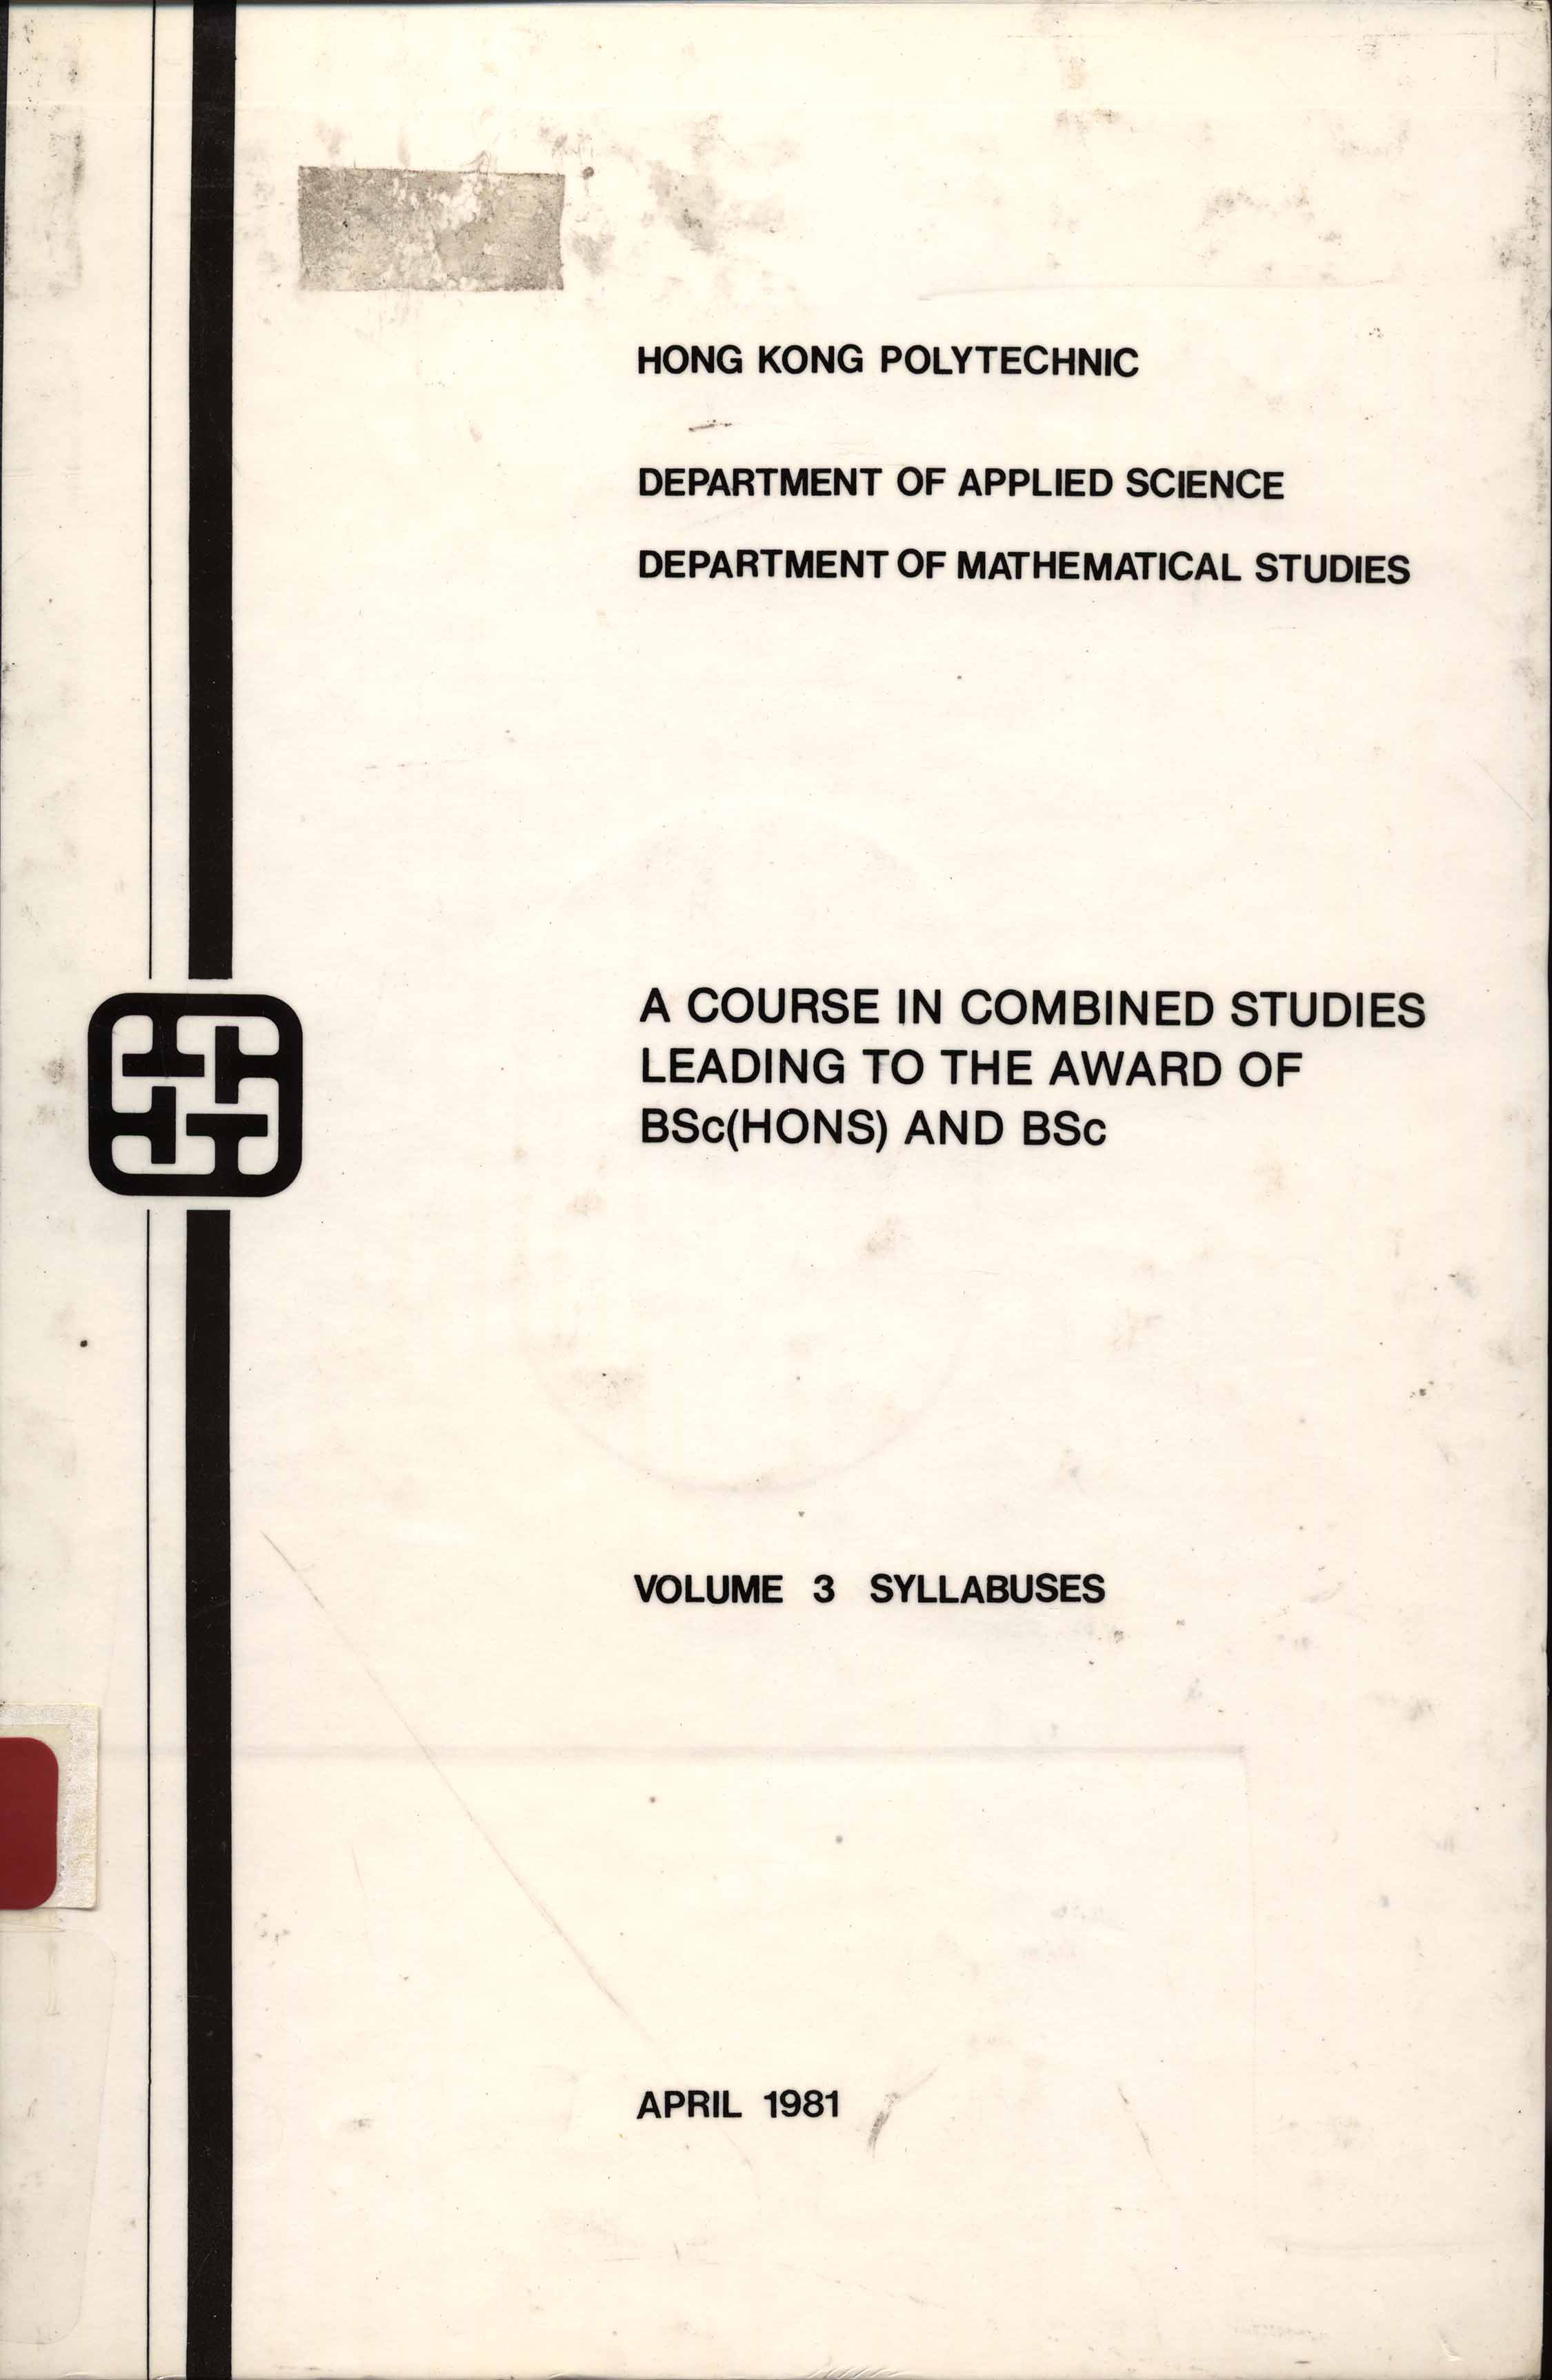 A course in combined studies leading to the award of BSc (Hons) and BSc. Volume 3: Syllabuses